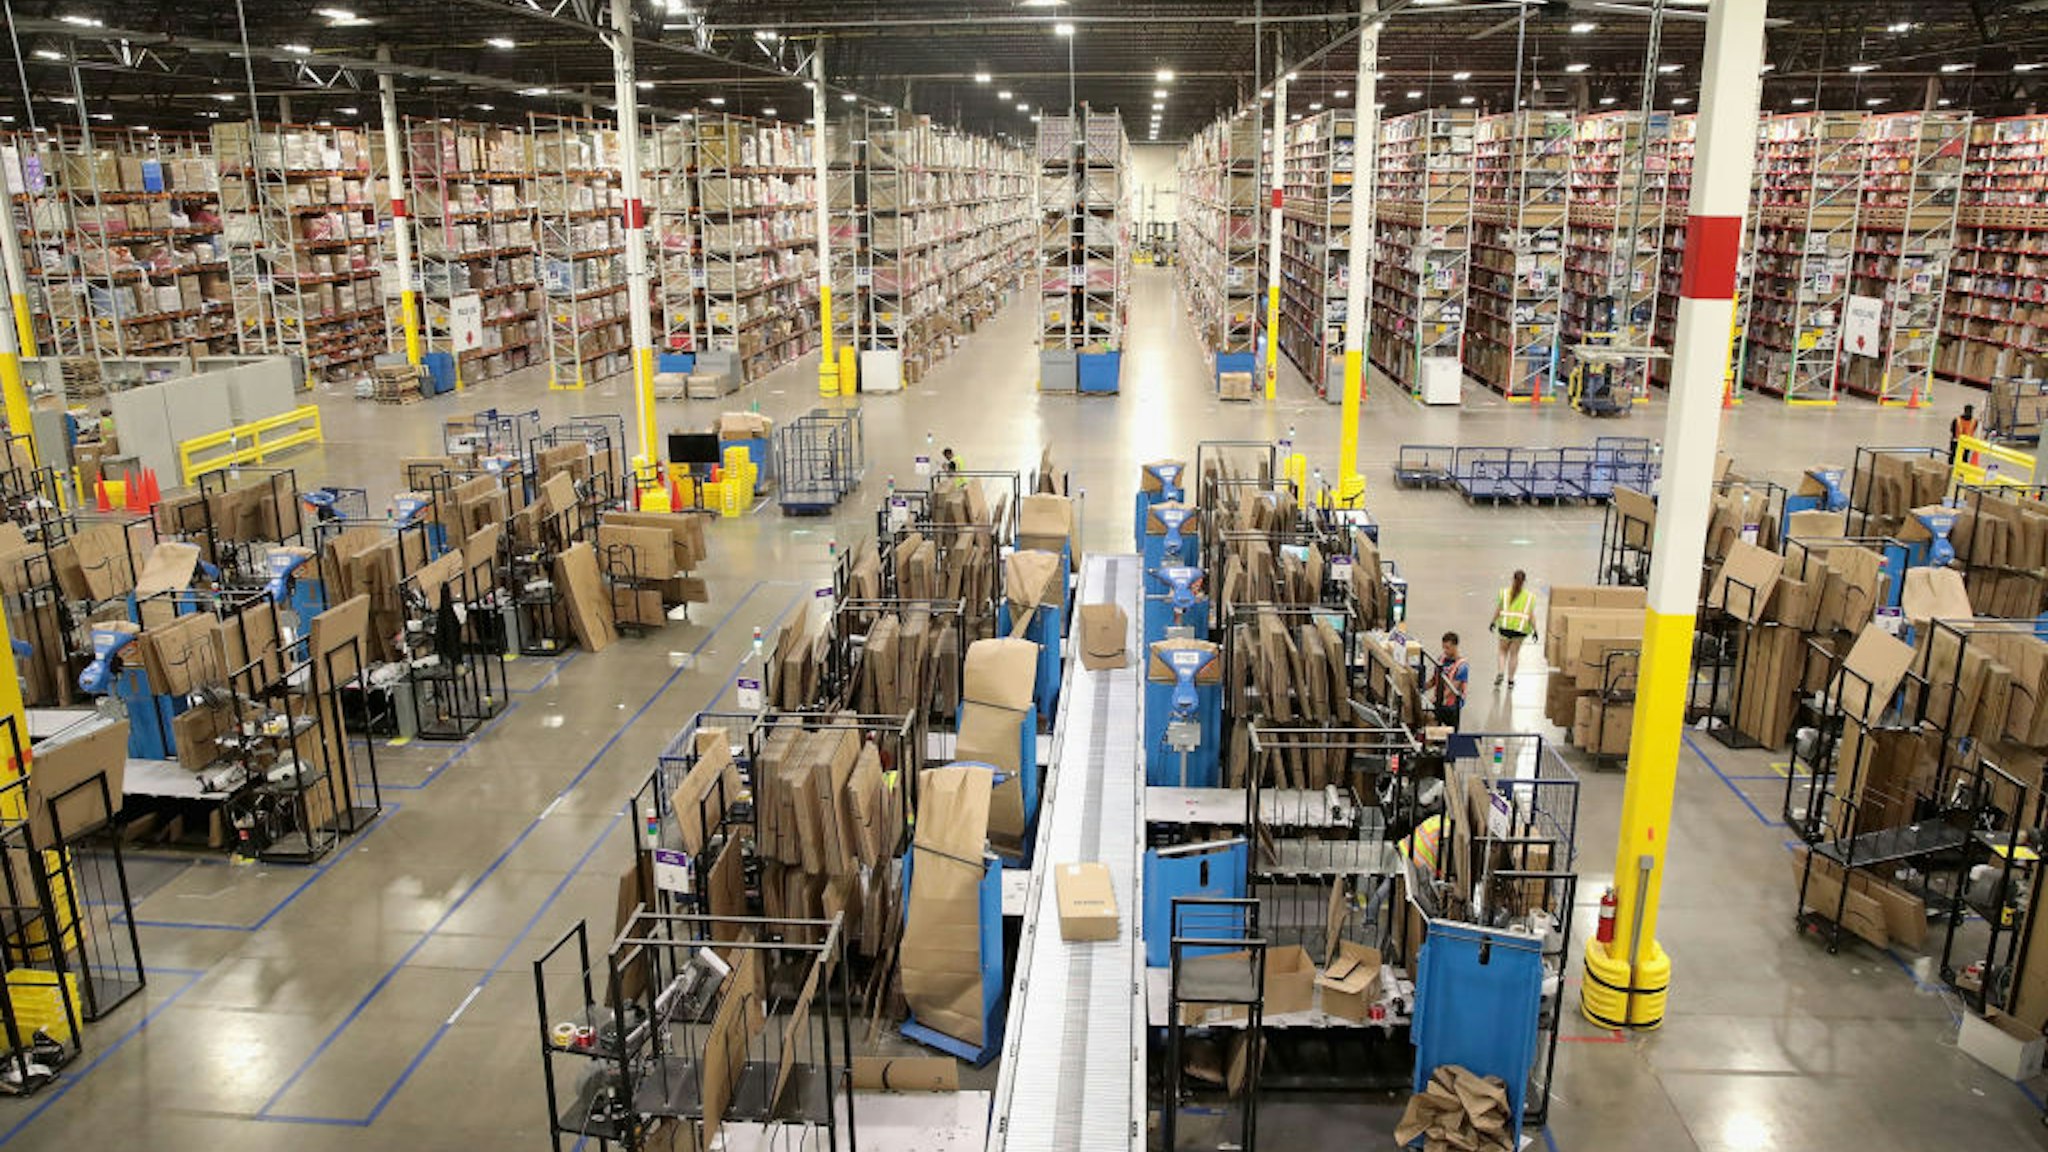 ROMEOVILLE, IL - AUGUST 01: Workers pack and ship customer orders at the 750,000-square-foot Amazon fulfillment center on August 1, 2017 in Romeoville, Illinois. On August 2, Amazon will be holding job fairs at several fulfillment centers around the country, including the Romeoville facility, in an attempt to hire more than 50,000 workers.